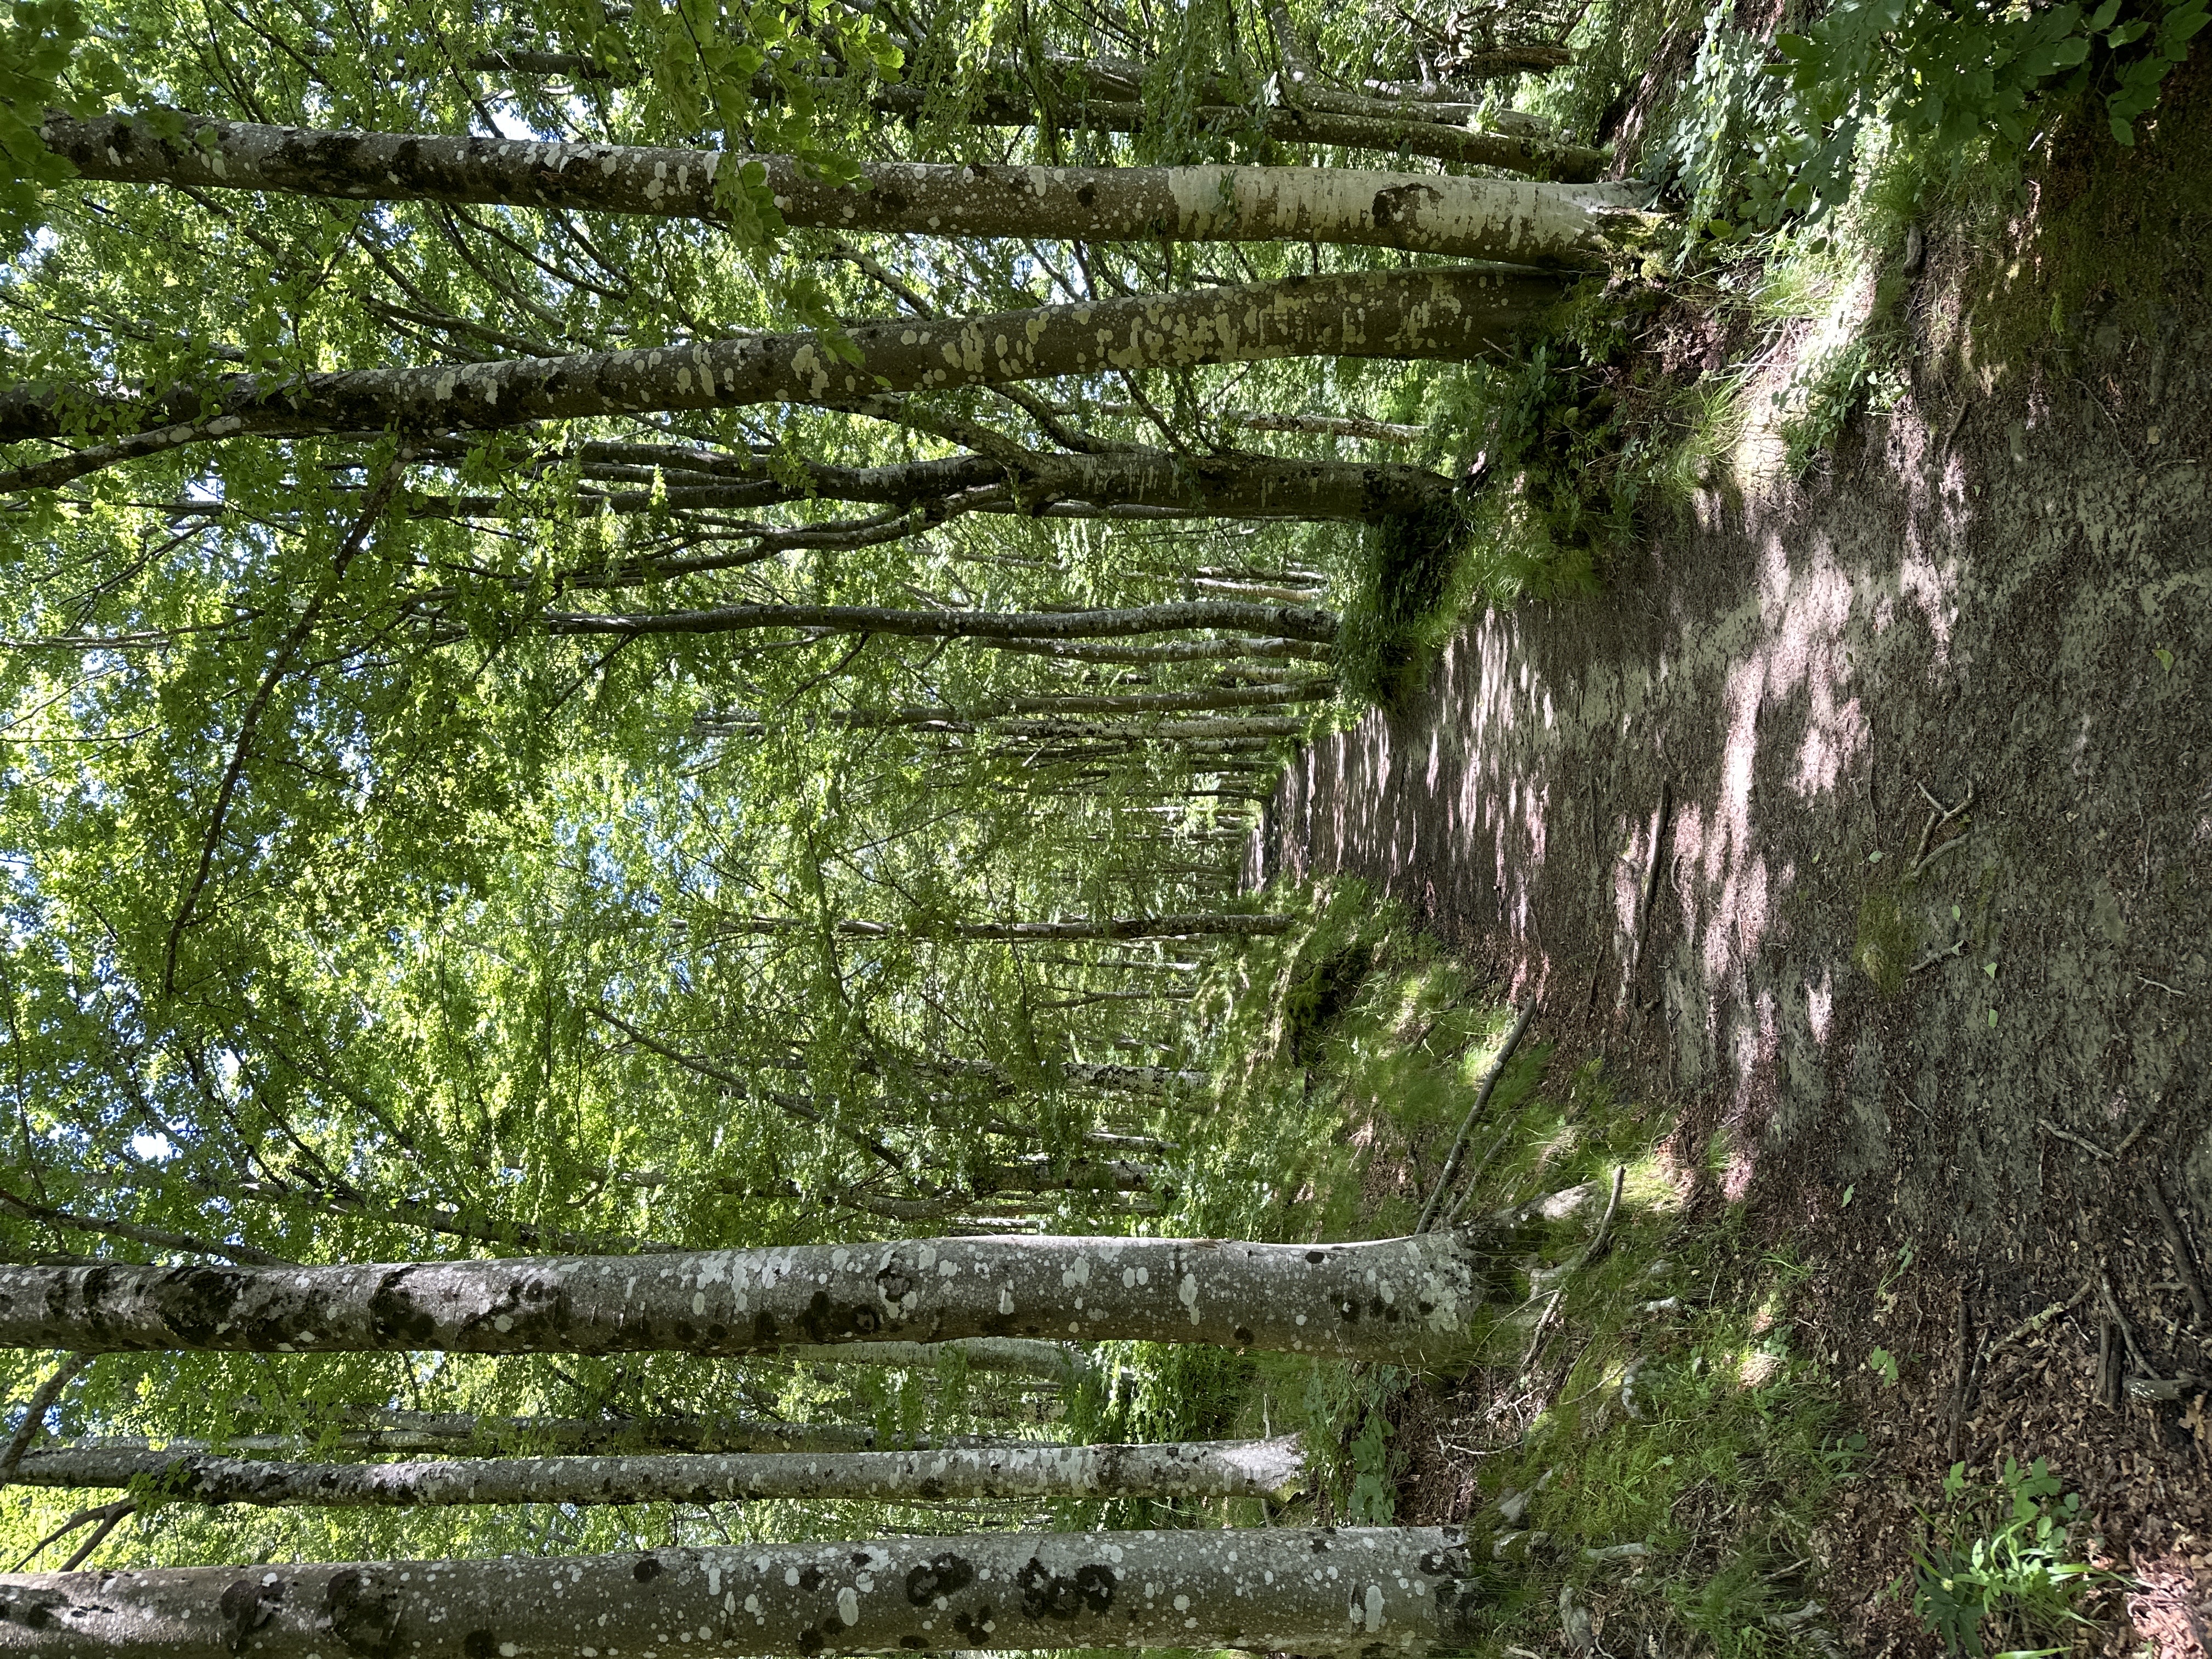 Beech forests are a characteristic feature of this area of the Apennines